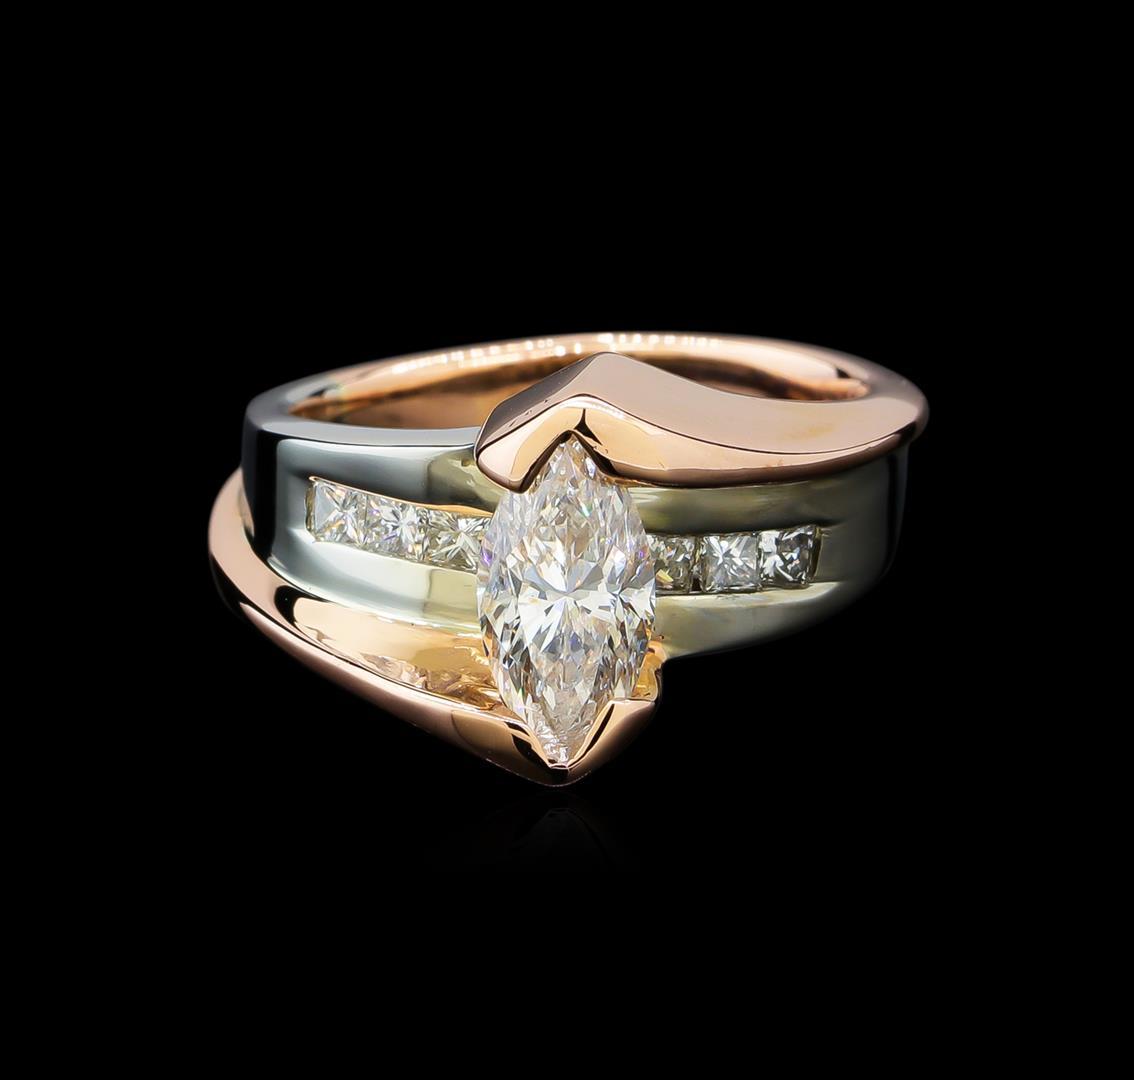 1.45 ctw Diamond Ring - 14KT White and Rose Gold